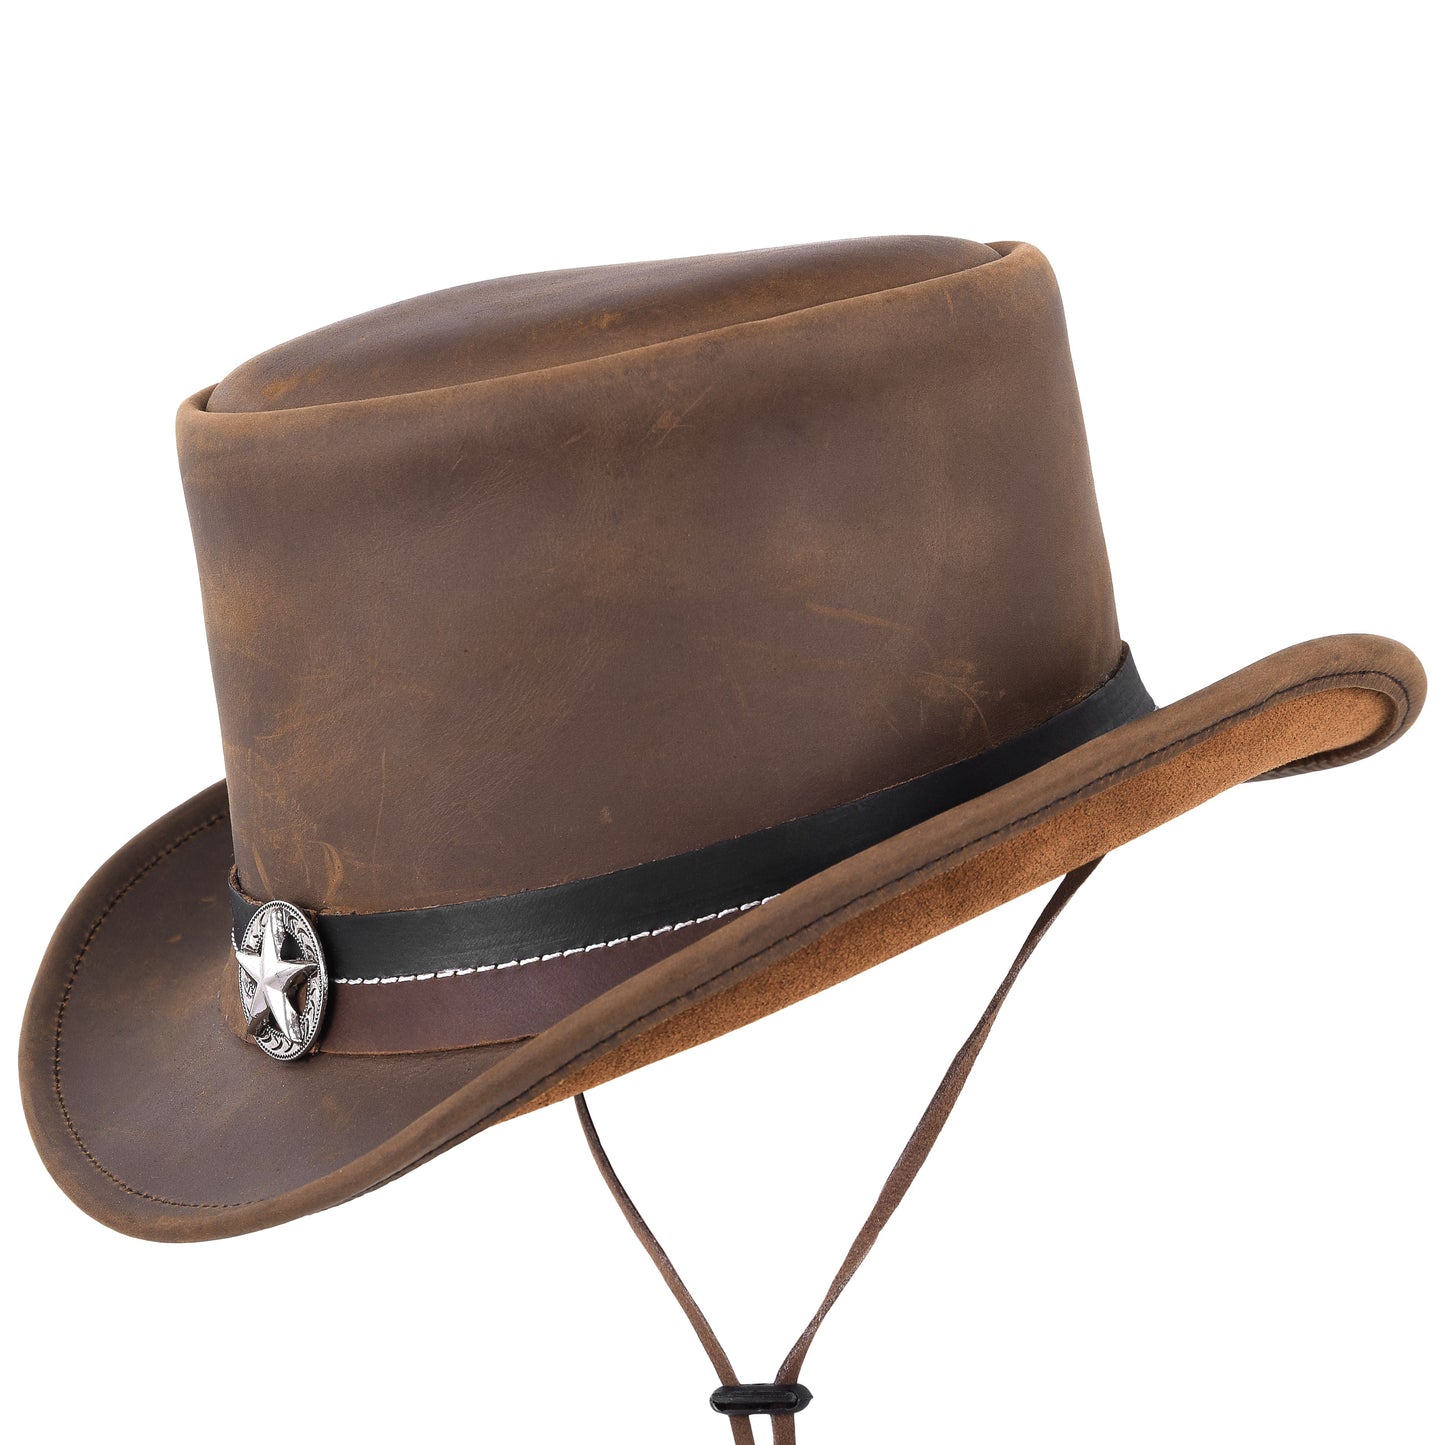 Vintage Leather Cowboy Hat with Star Hatband Brown Top Hat